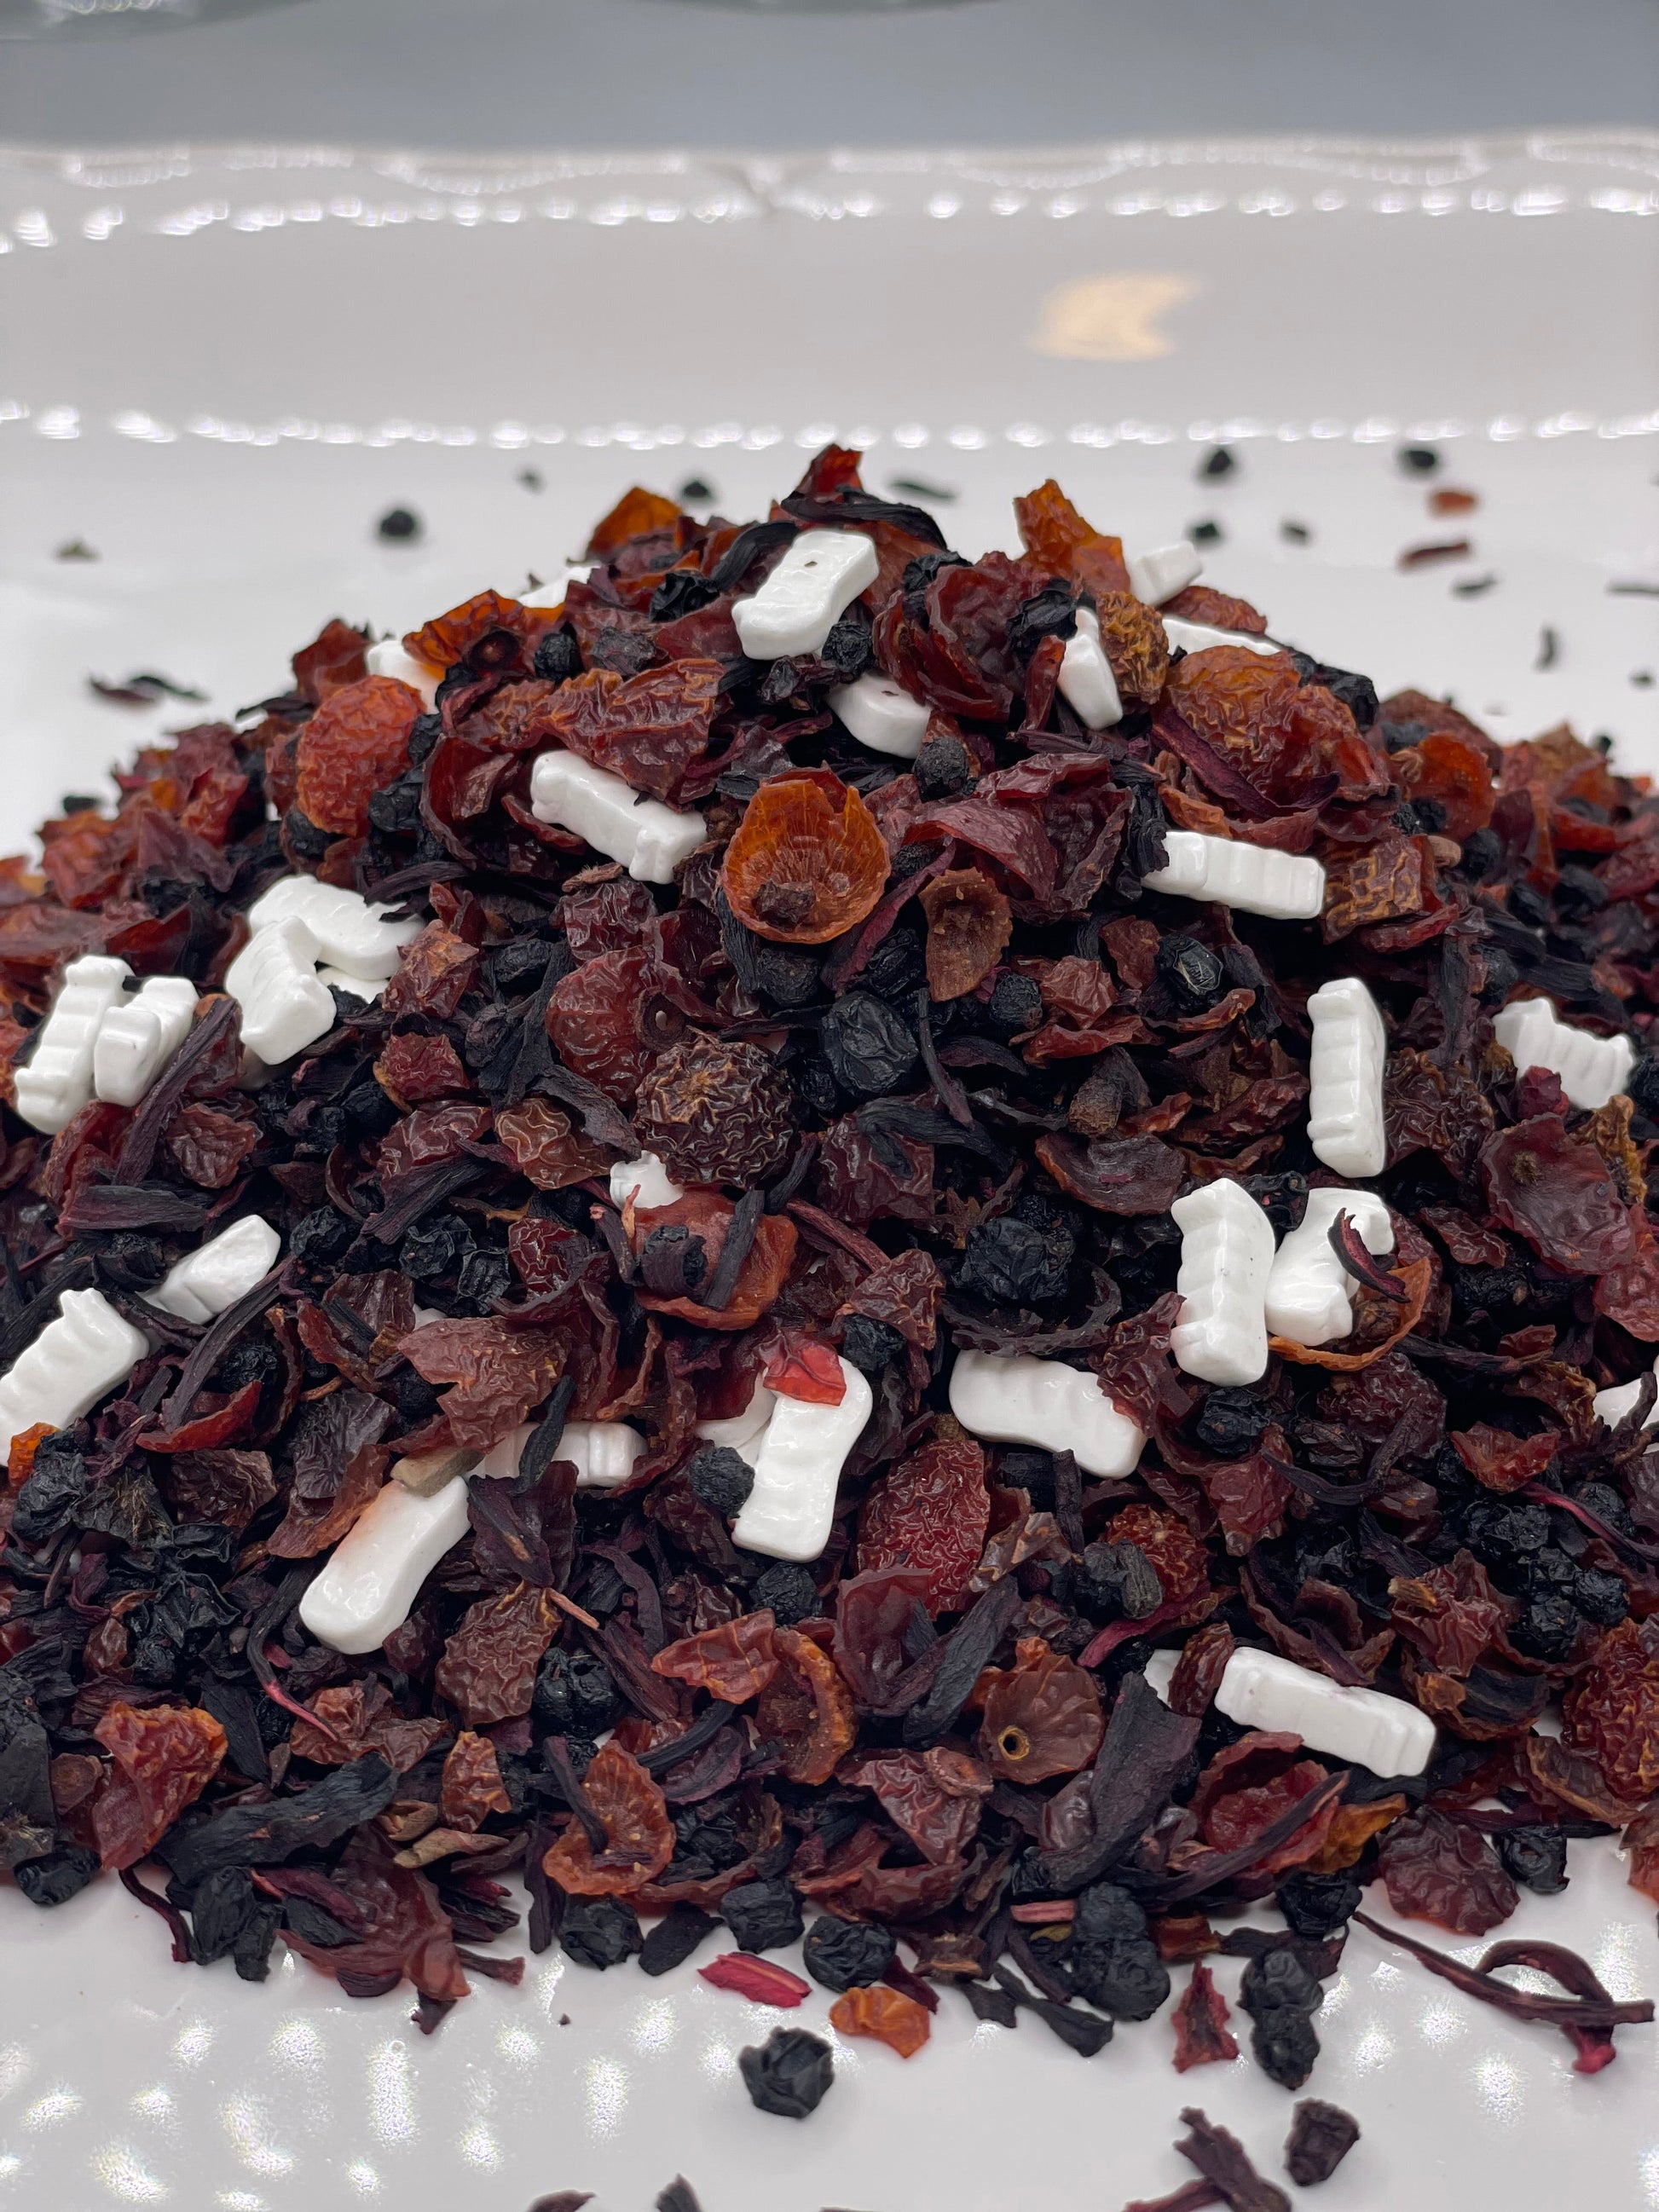 Witchy Pooh's Vampire's Kiss Loose Leaf Fruit Elderberry Herbal Tea with Candy Vampire Teeth, Caffeine Free-16